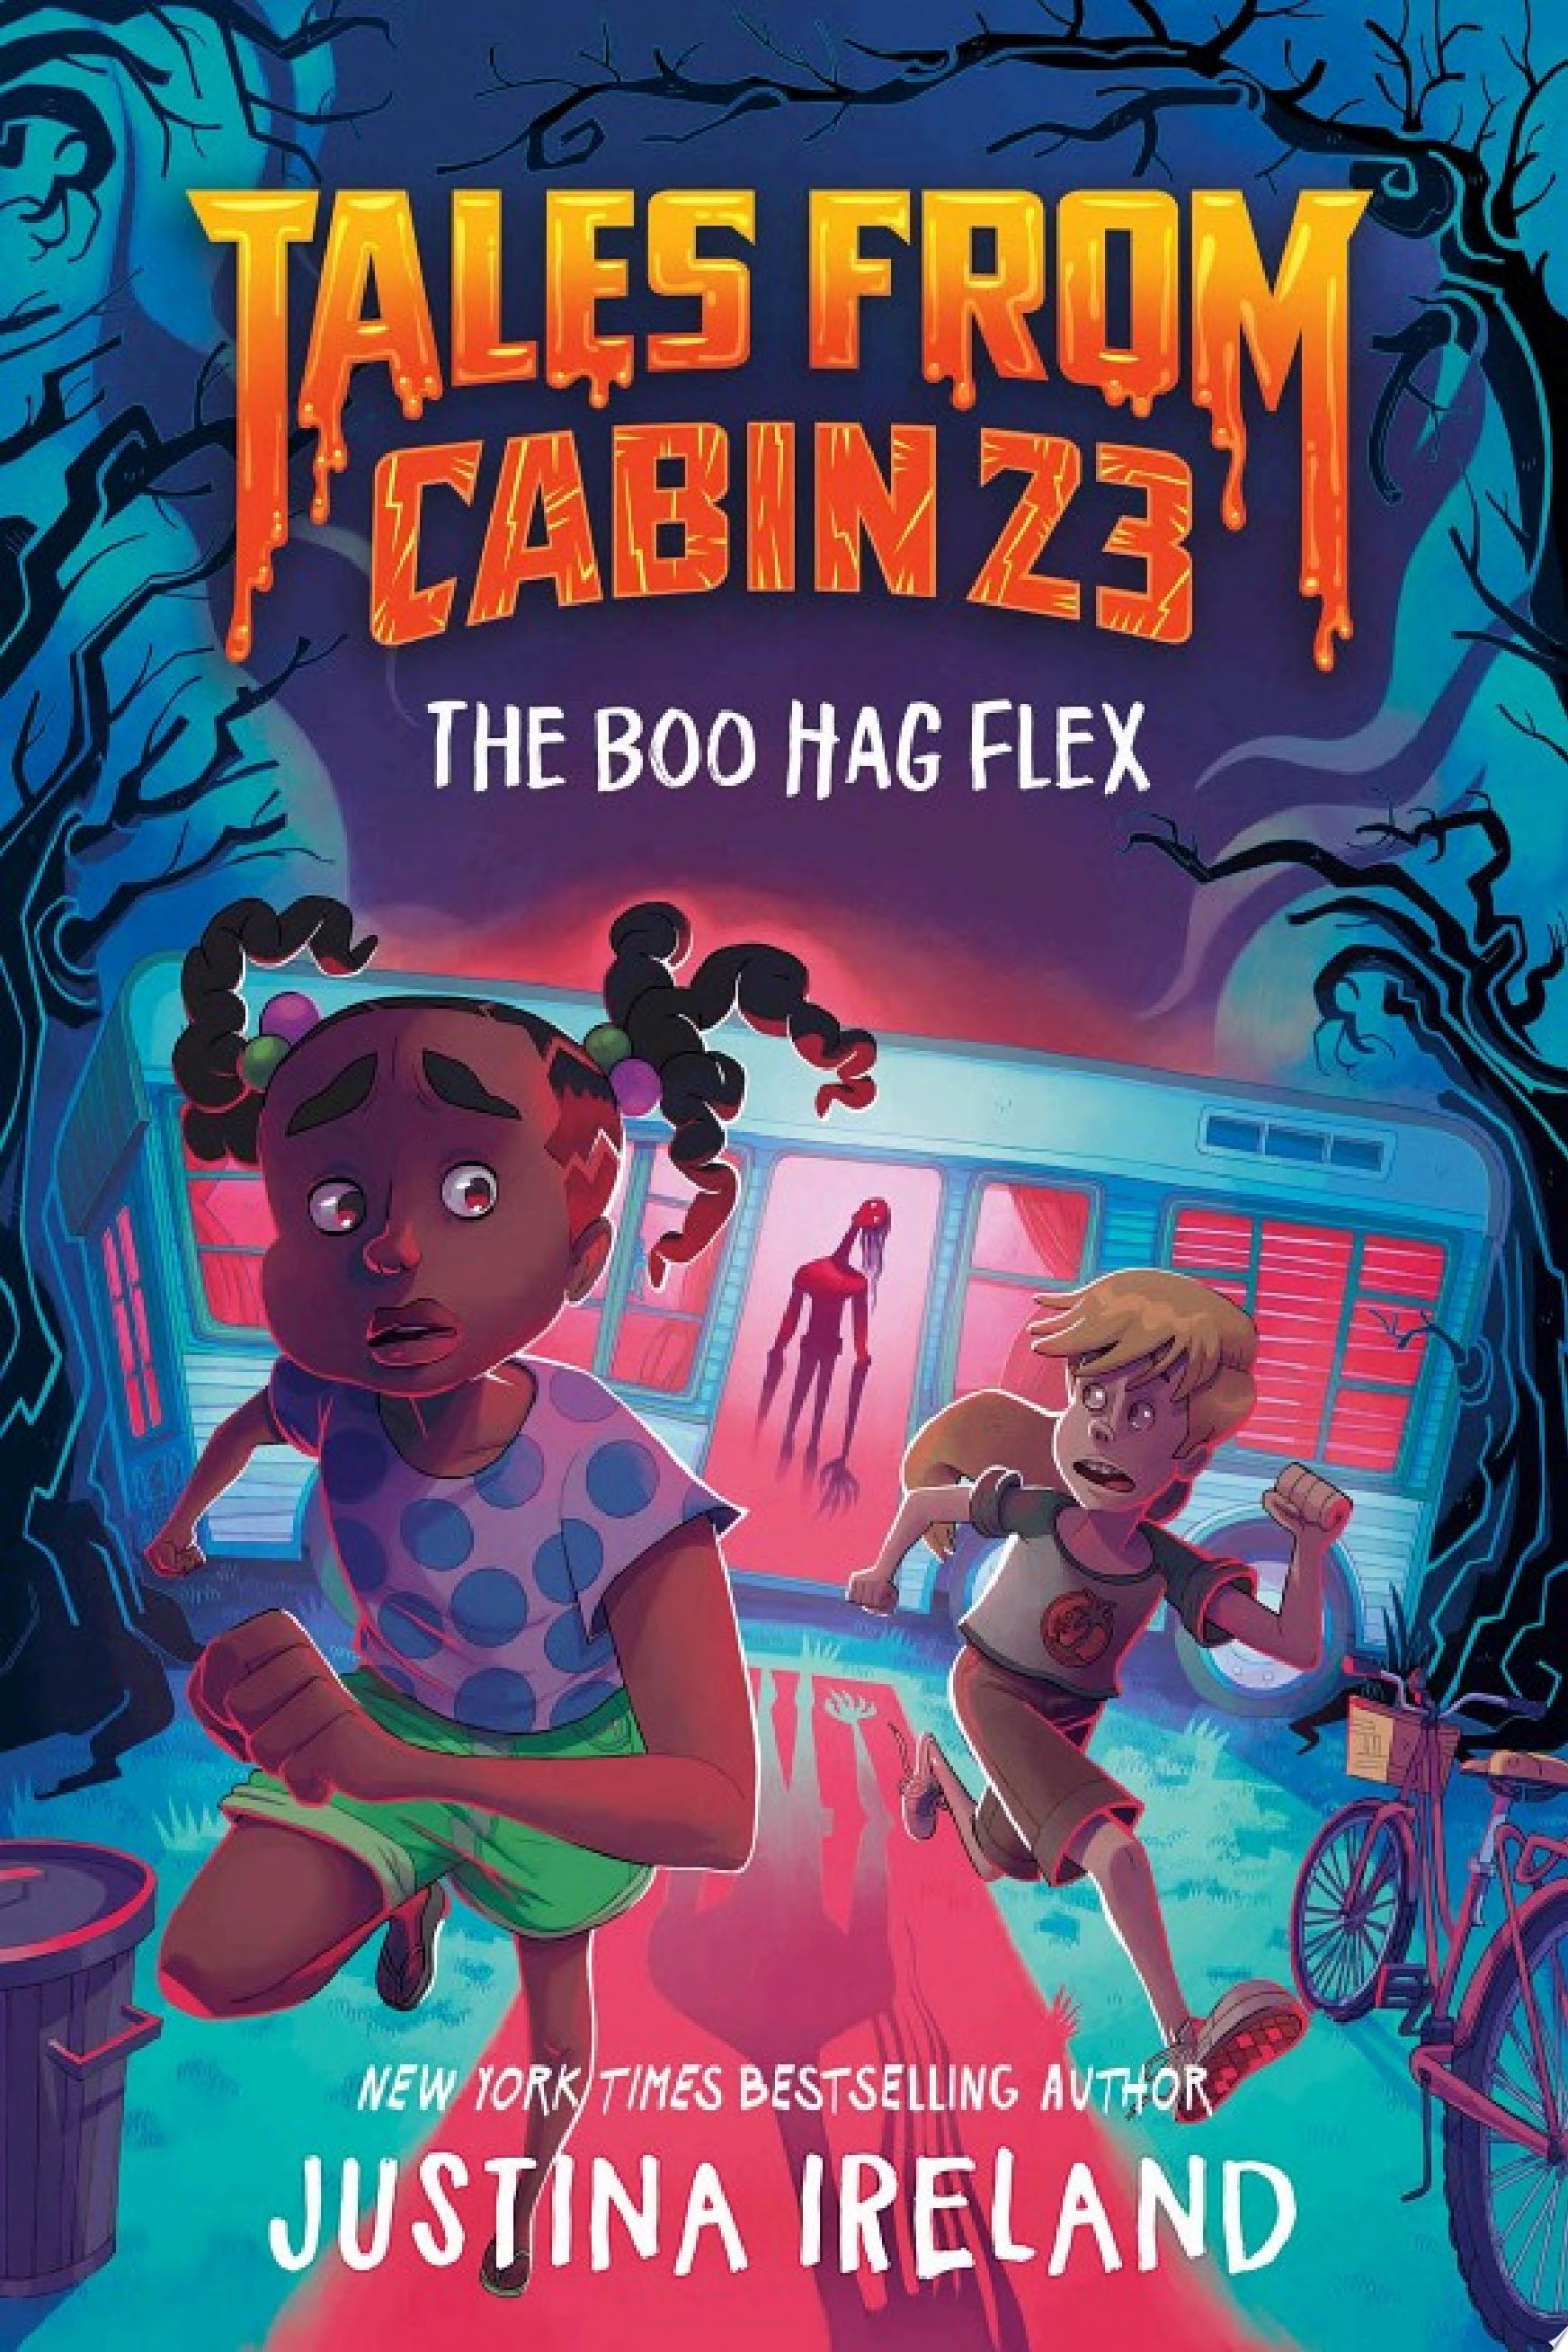 Image for "Tales from Cabin 23: The Boo Hag Flex"